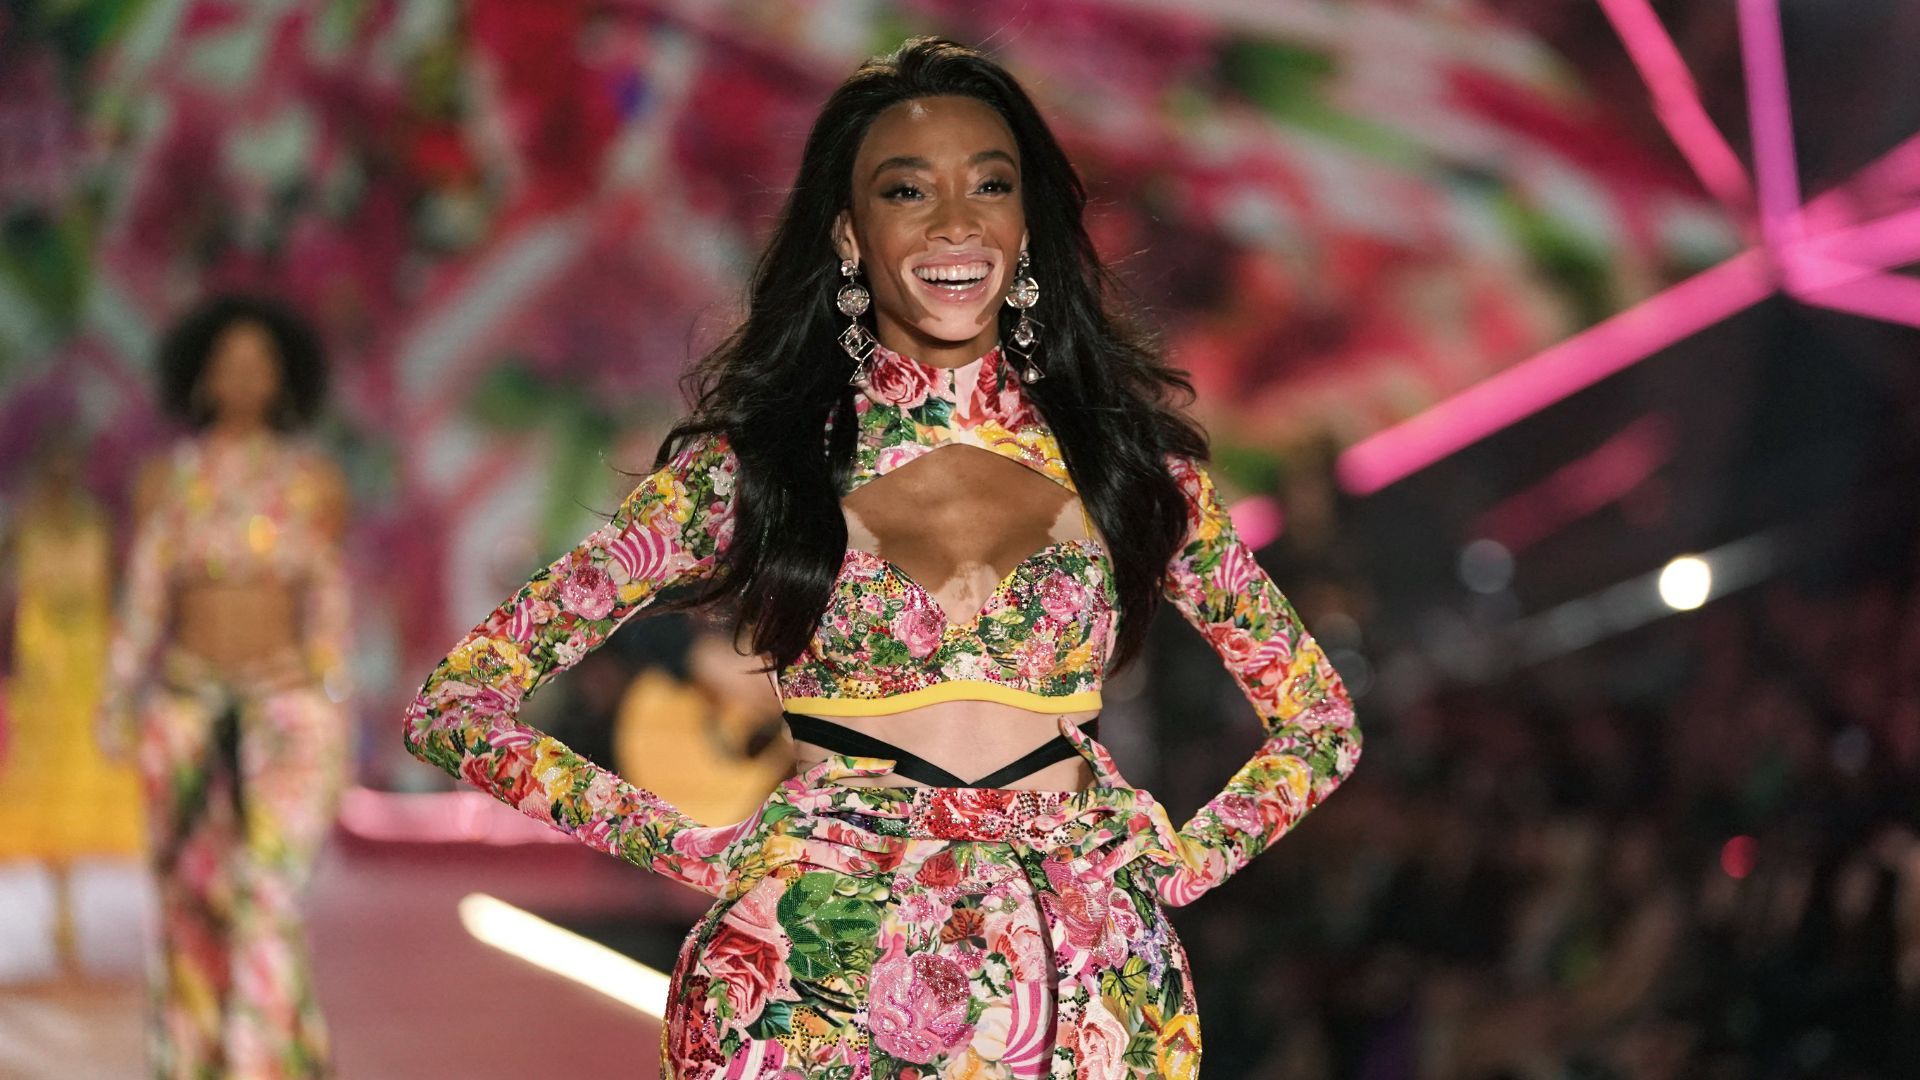 Victoria's Secret fashion show: The most iconic moments of all time